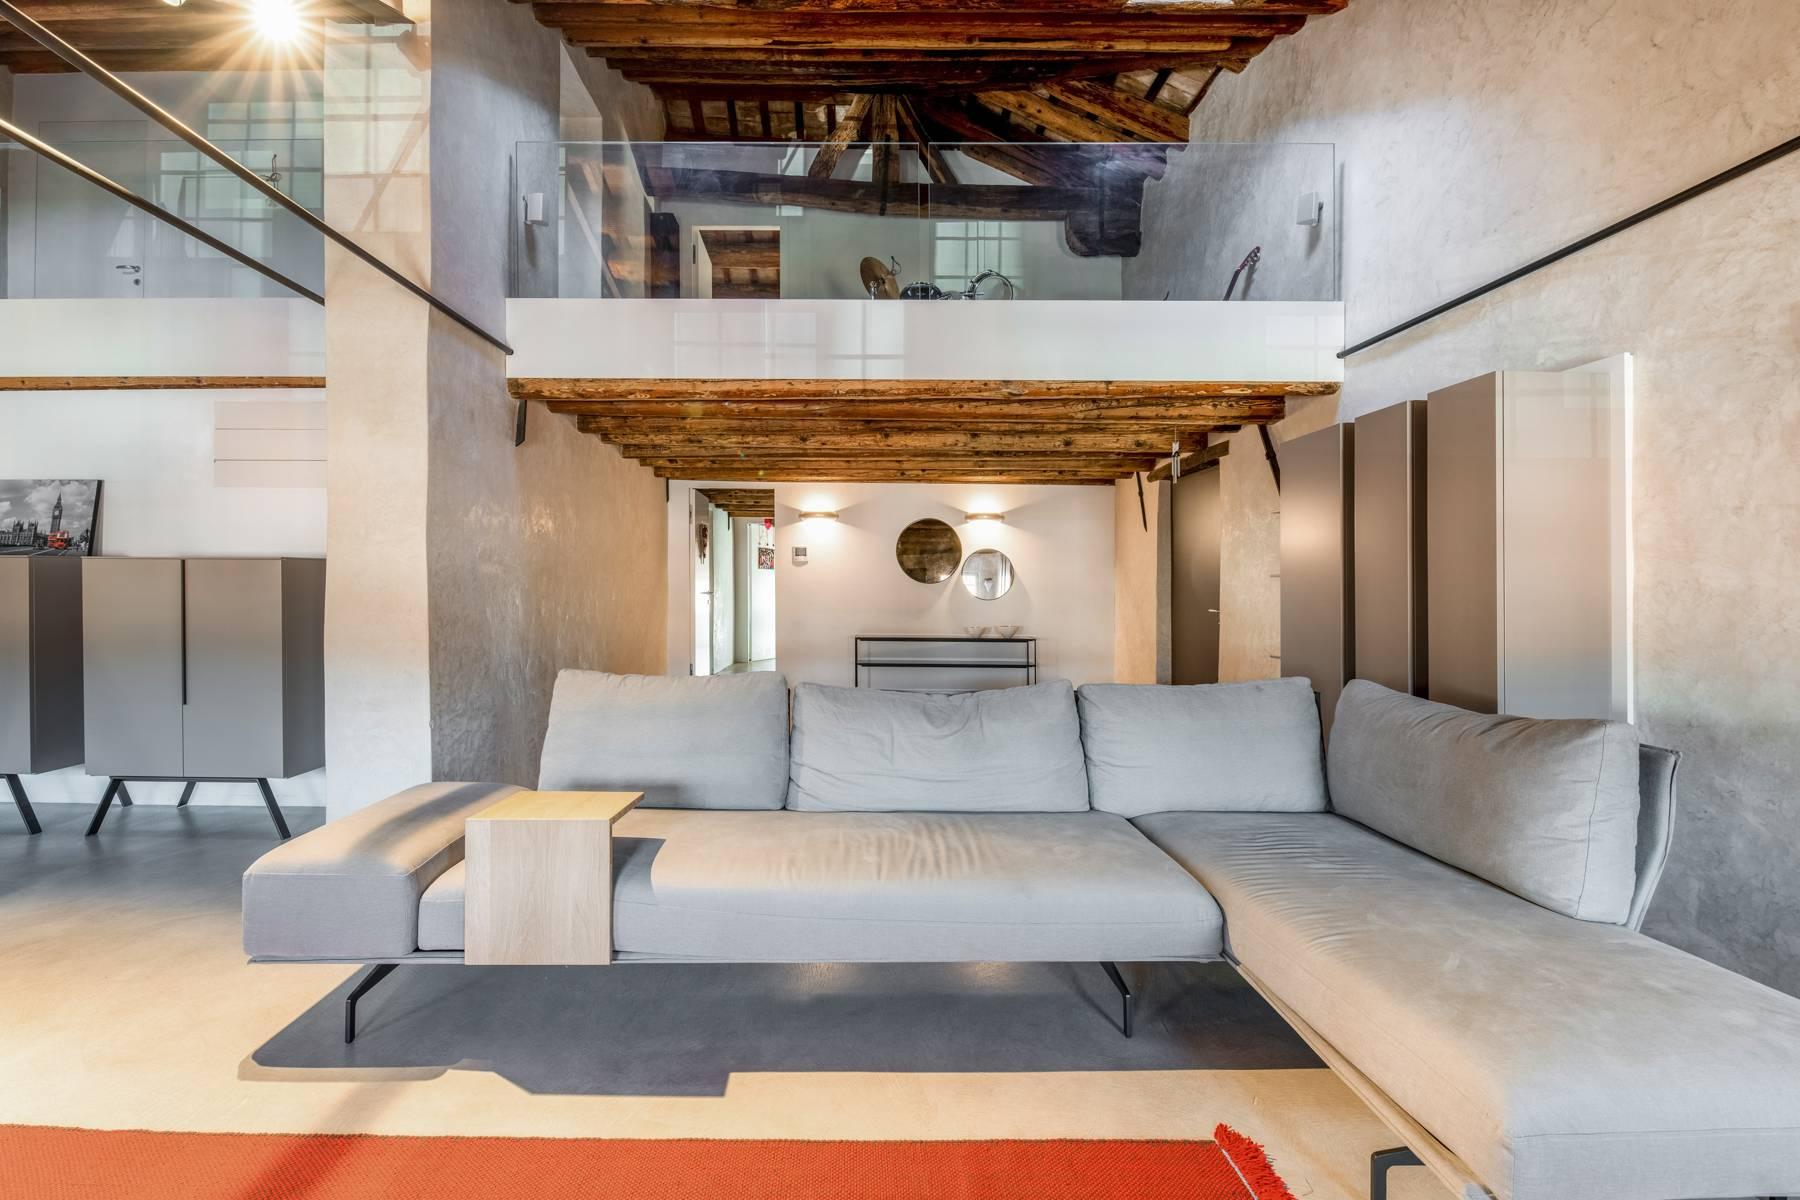 Luxurious penthouse on a 17th century Venetian Villa completely renovated - 2